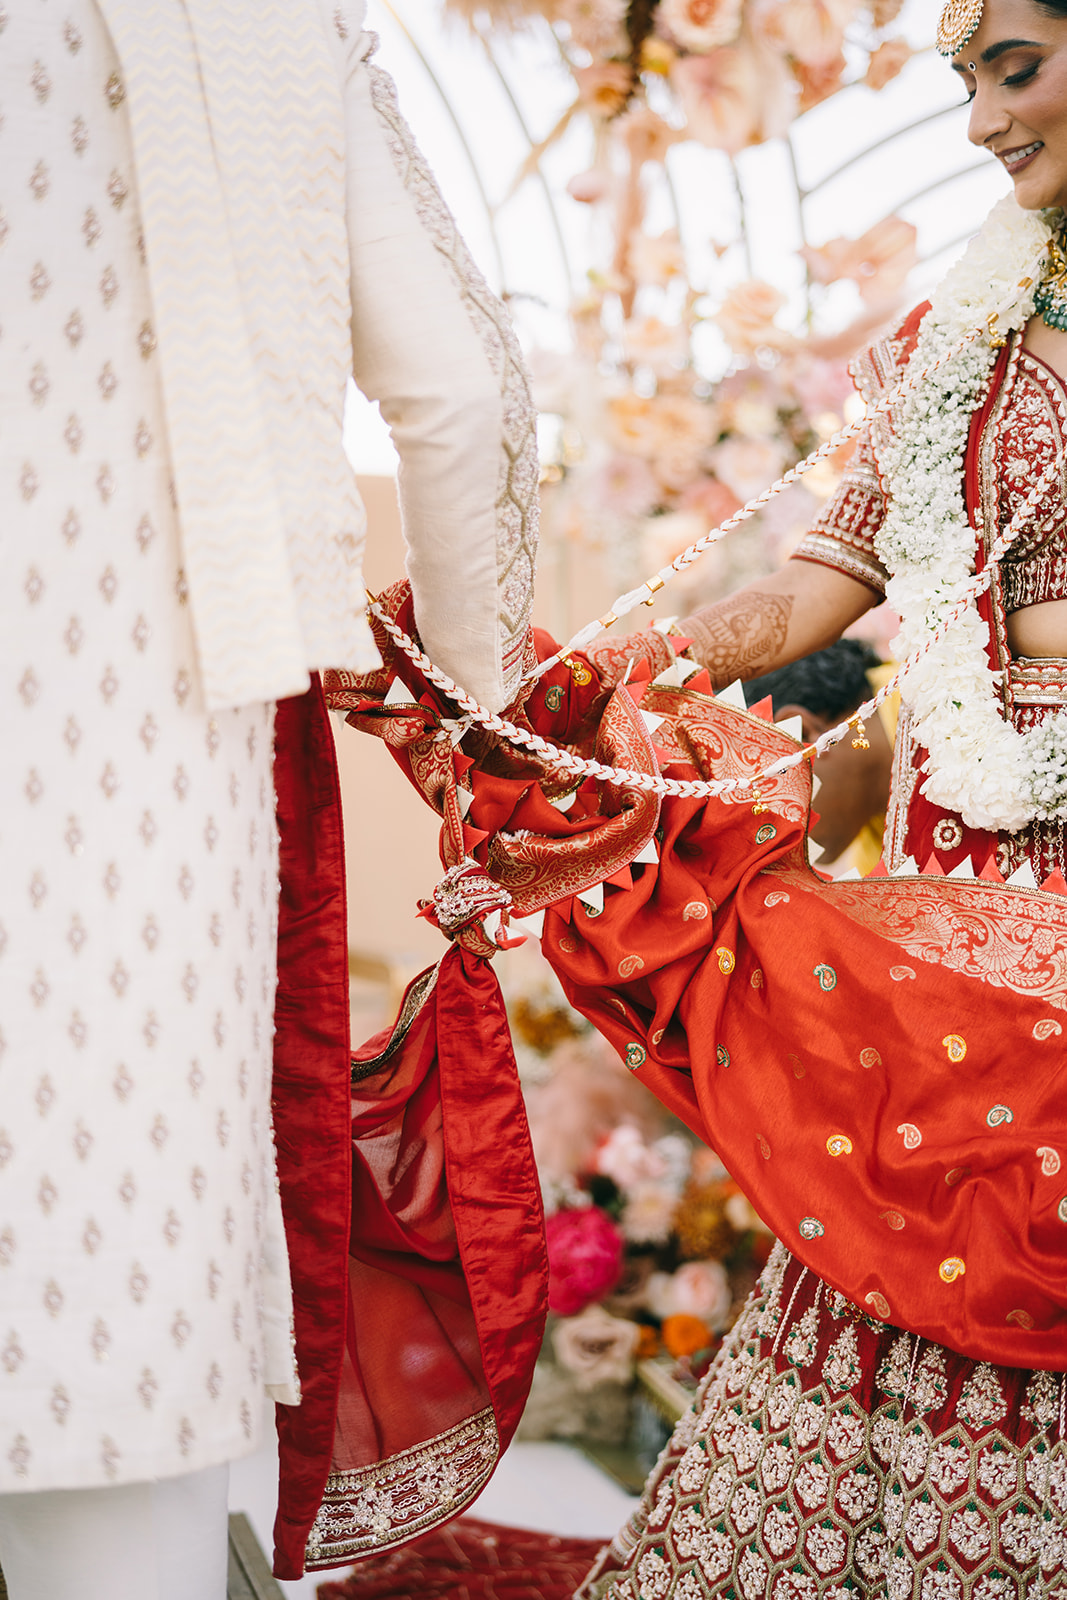 Indian groom and bride putting their hands together in a red fabric